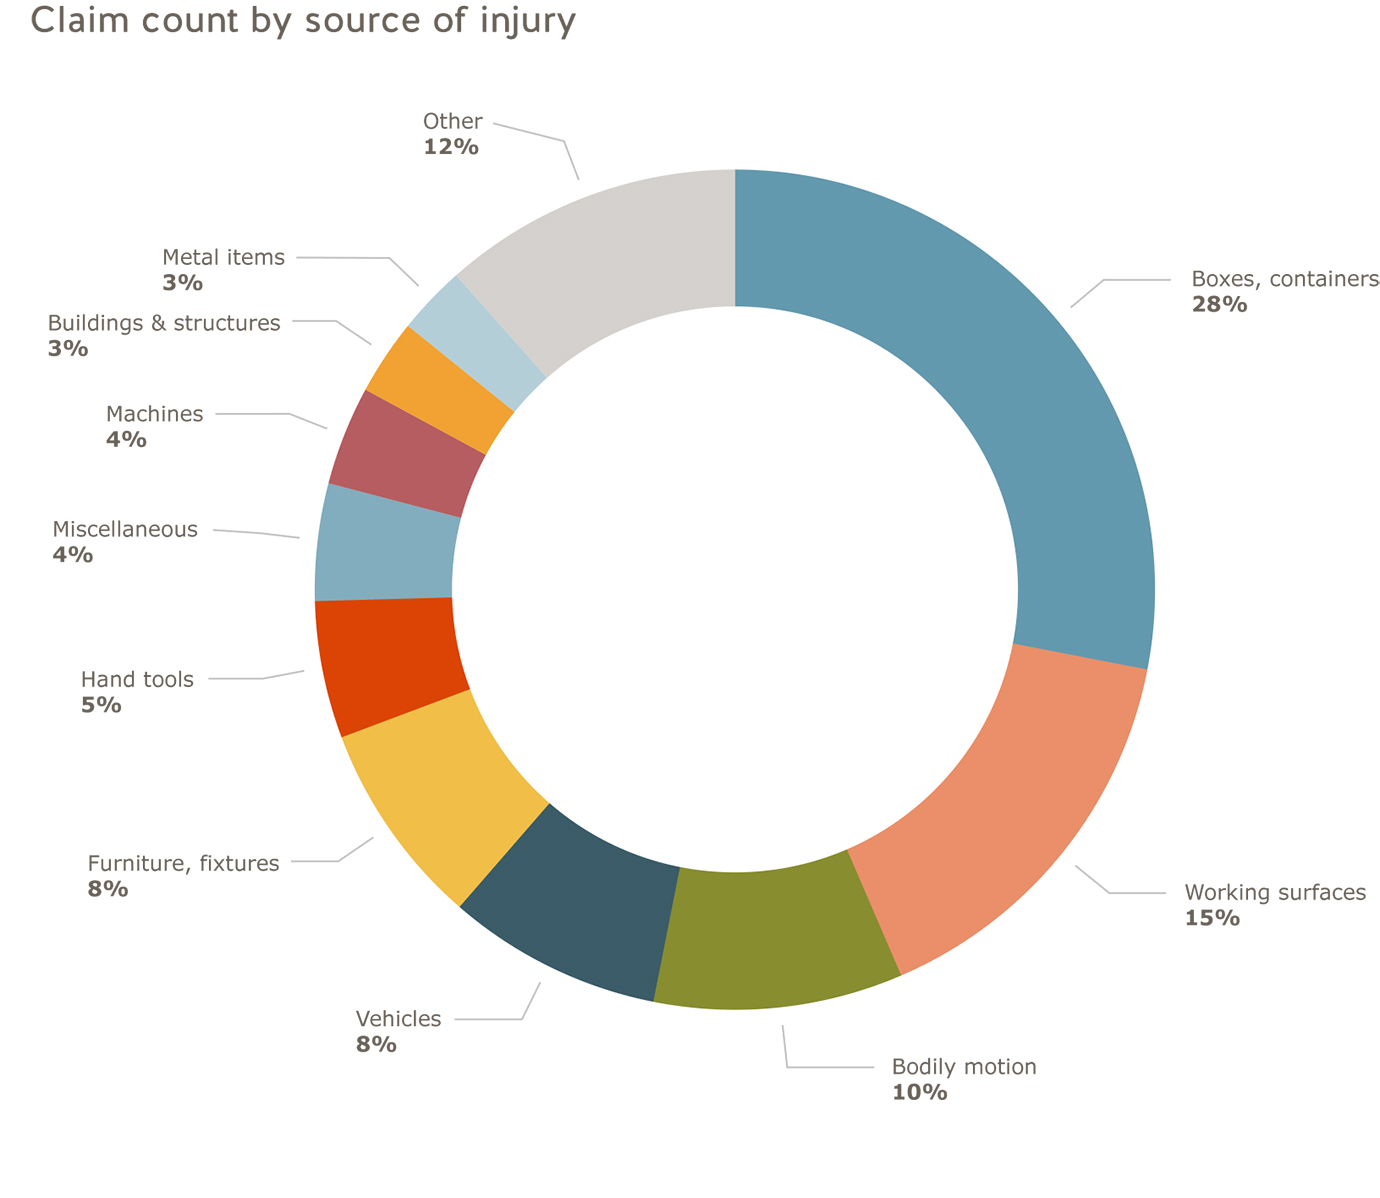 Retail industry claim count by source of injury: boxes, containers=28%; working surfaces=15%; bodily motion=10%; vehicles=8%; furniture, fixtures=8%; hand tools=5%; miscellaneous=4%; machines=4%; buildings and structures=3%; other=12%